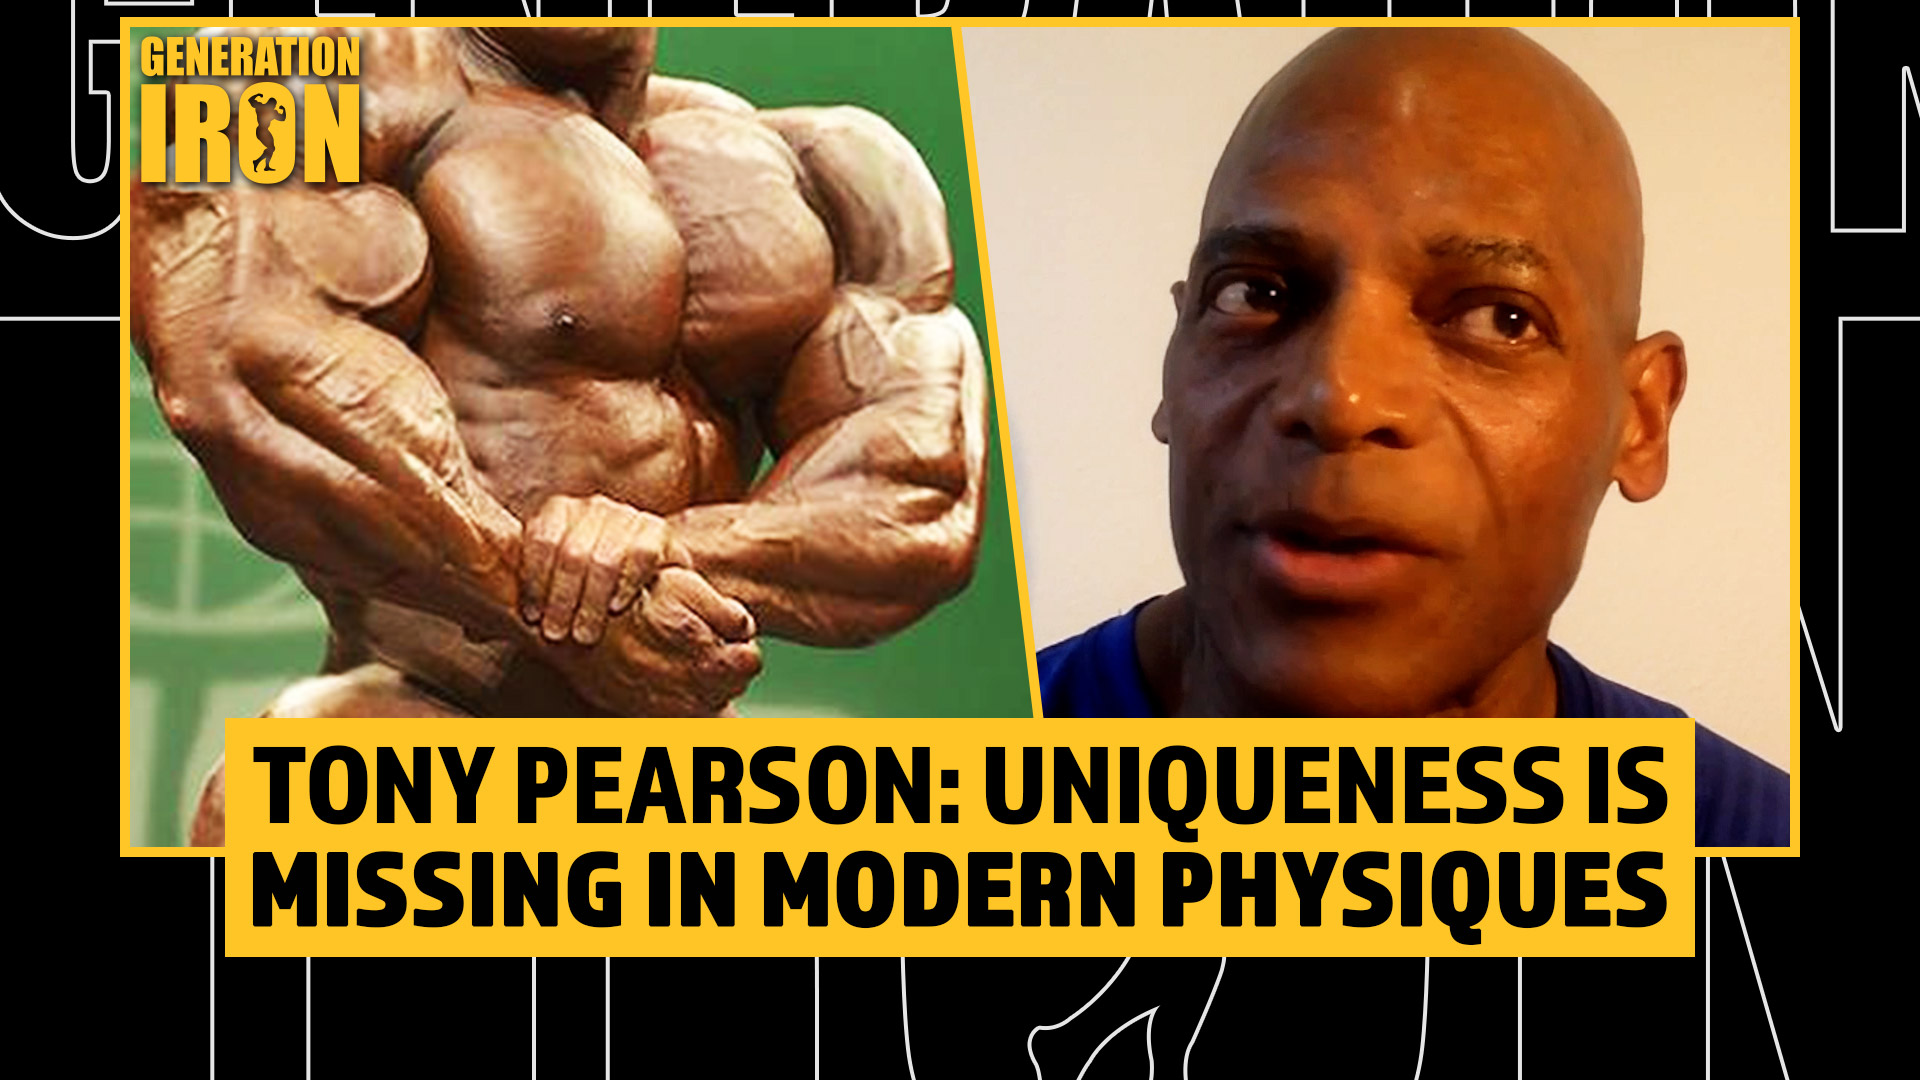 Tony Pearson: Uniqueness Is Missing From Pro Bodybuilding Physiques Today